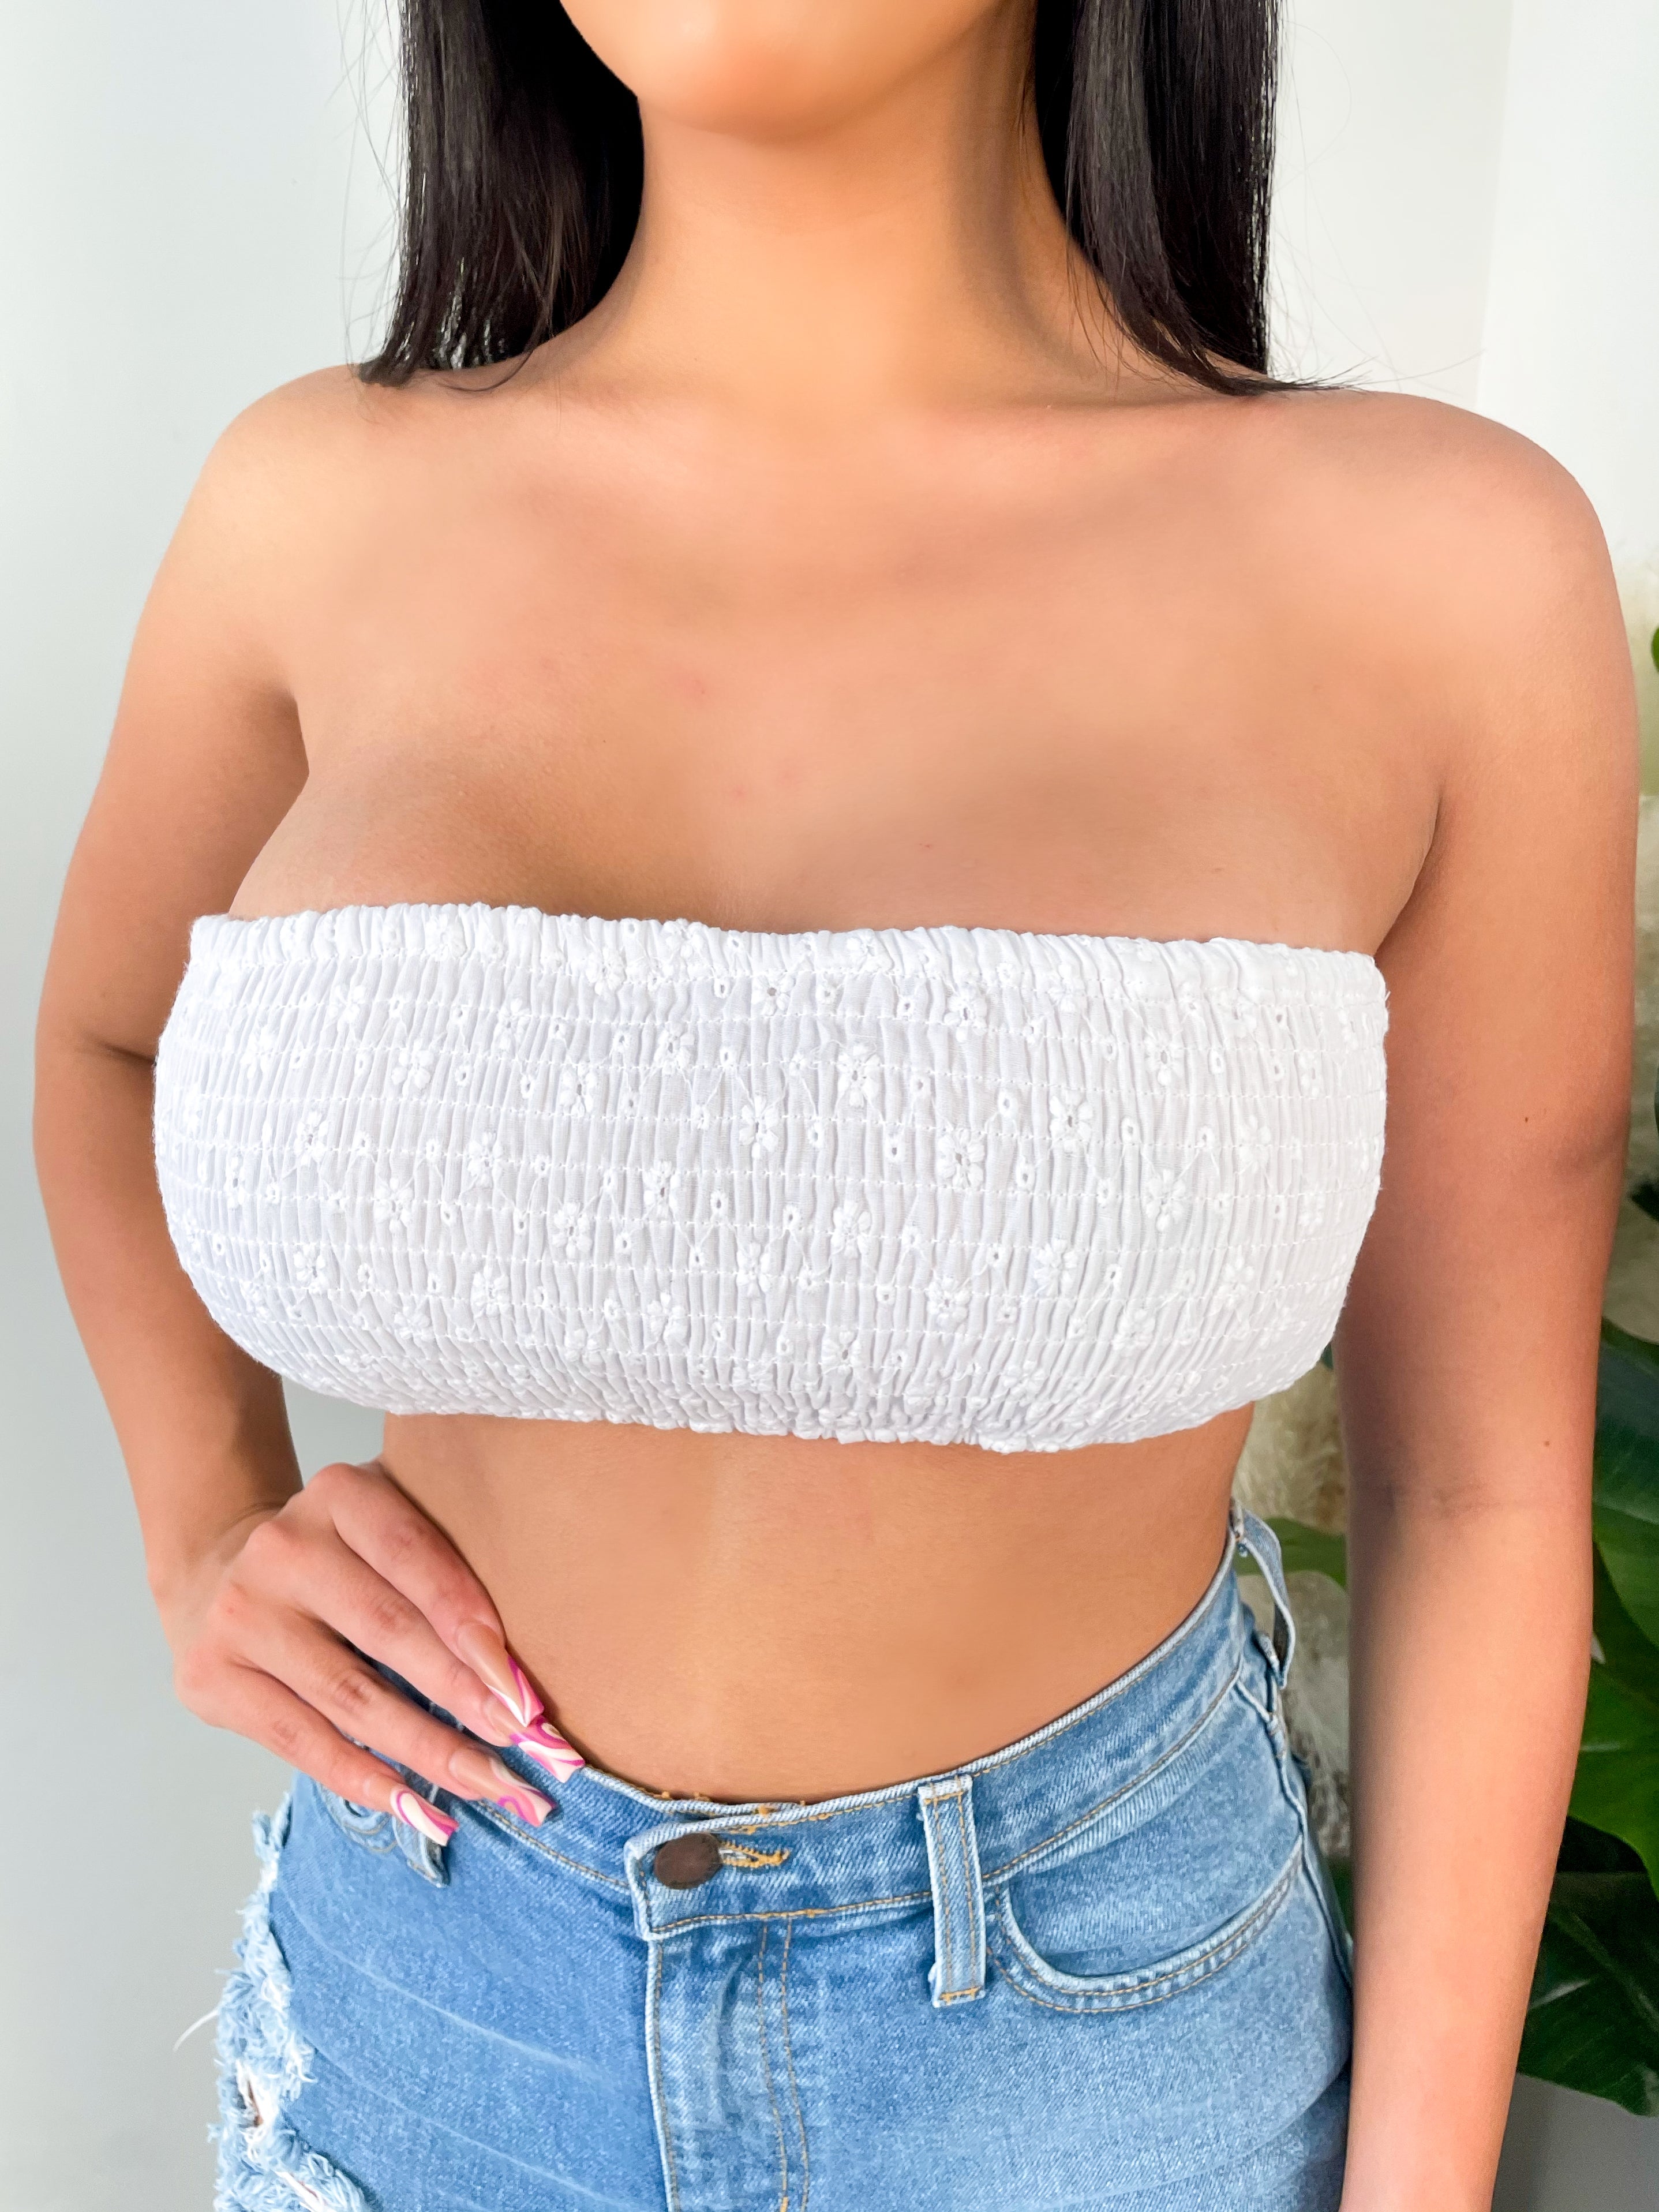 tube top and